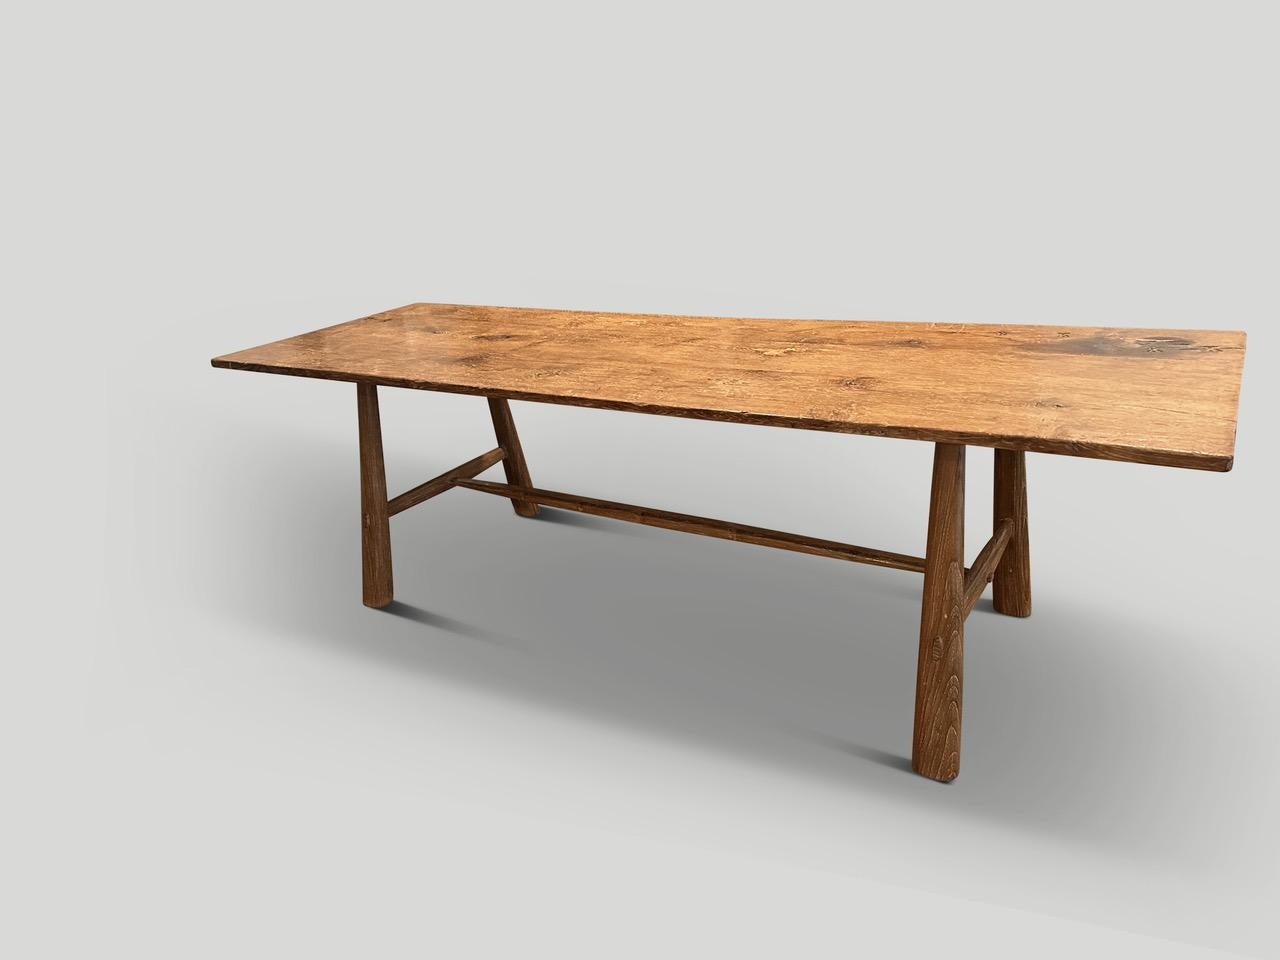 Andrianna Shamaris Midcentury Couture Teak Wood Dining Table For Sale 1